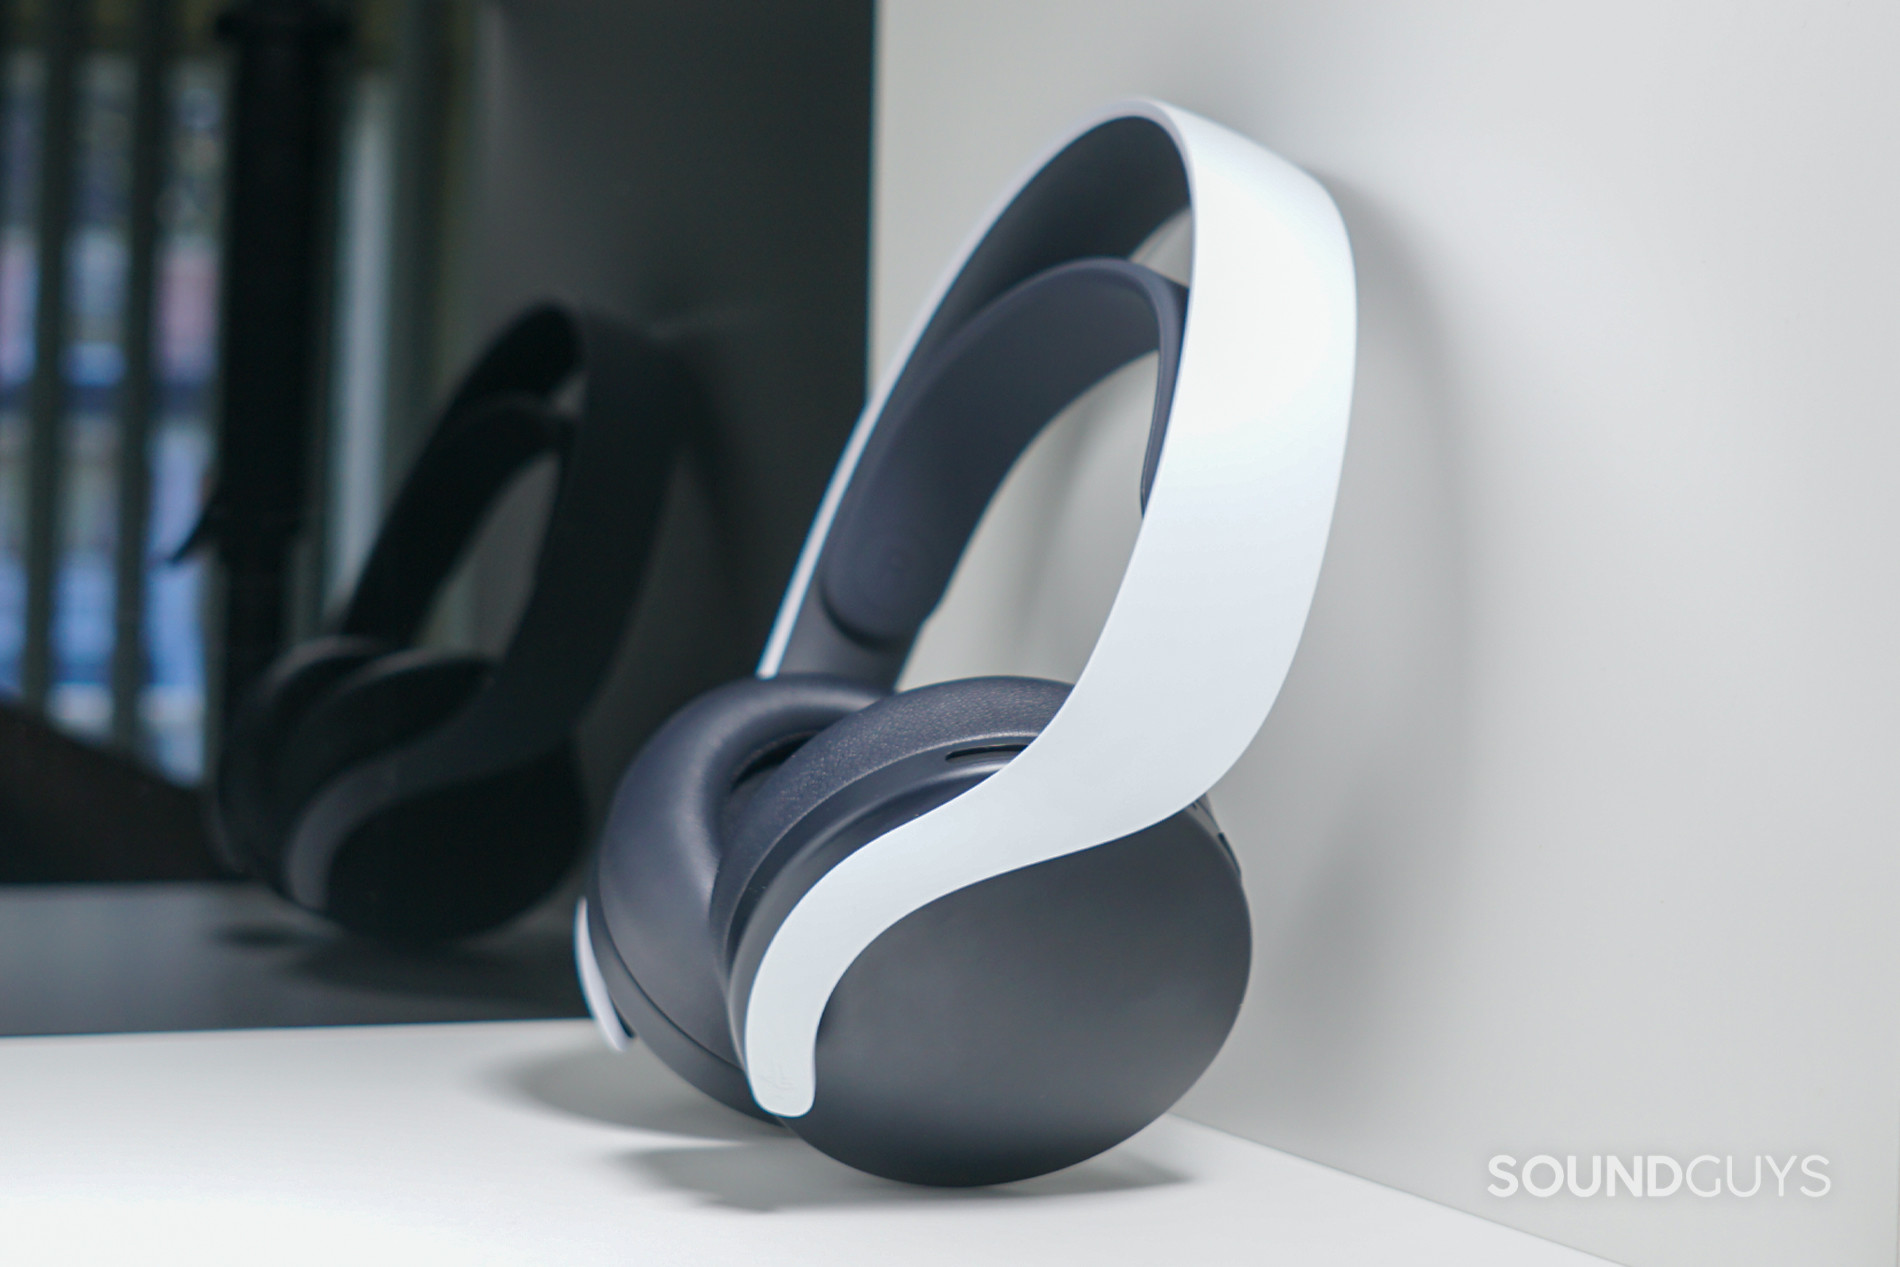 The Sony Pulse 3D wireless headset sits on a white shelf in front of a reflective black panel.